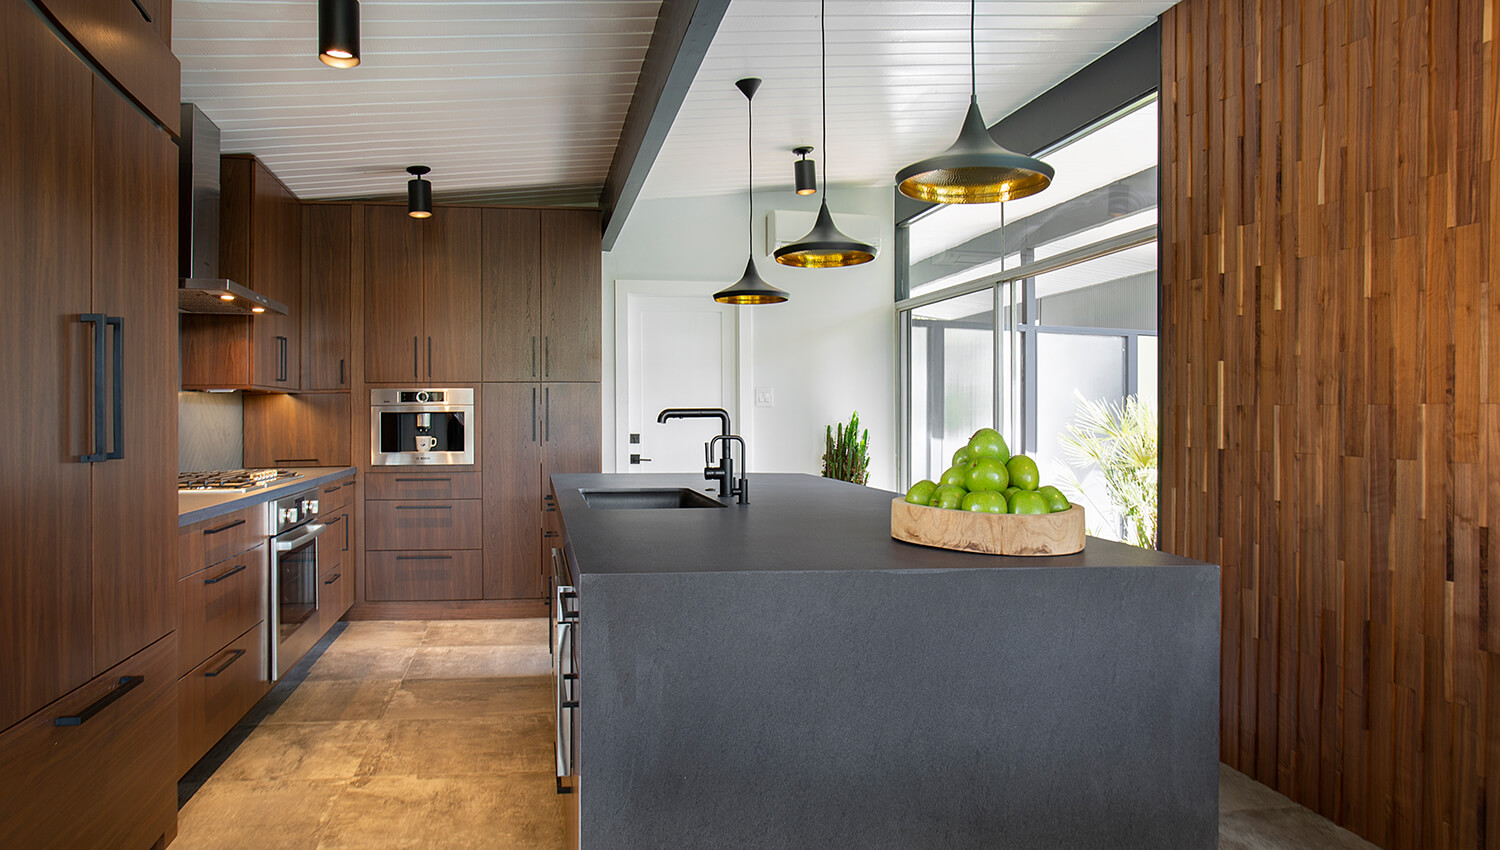 A beautiful modern-day kitchen with mid-century modern style.